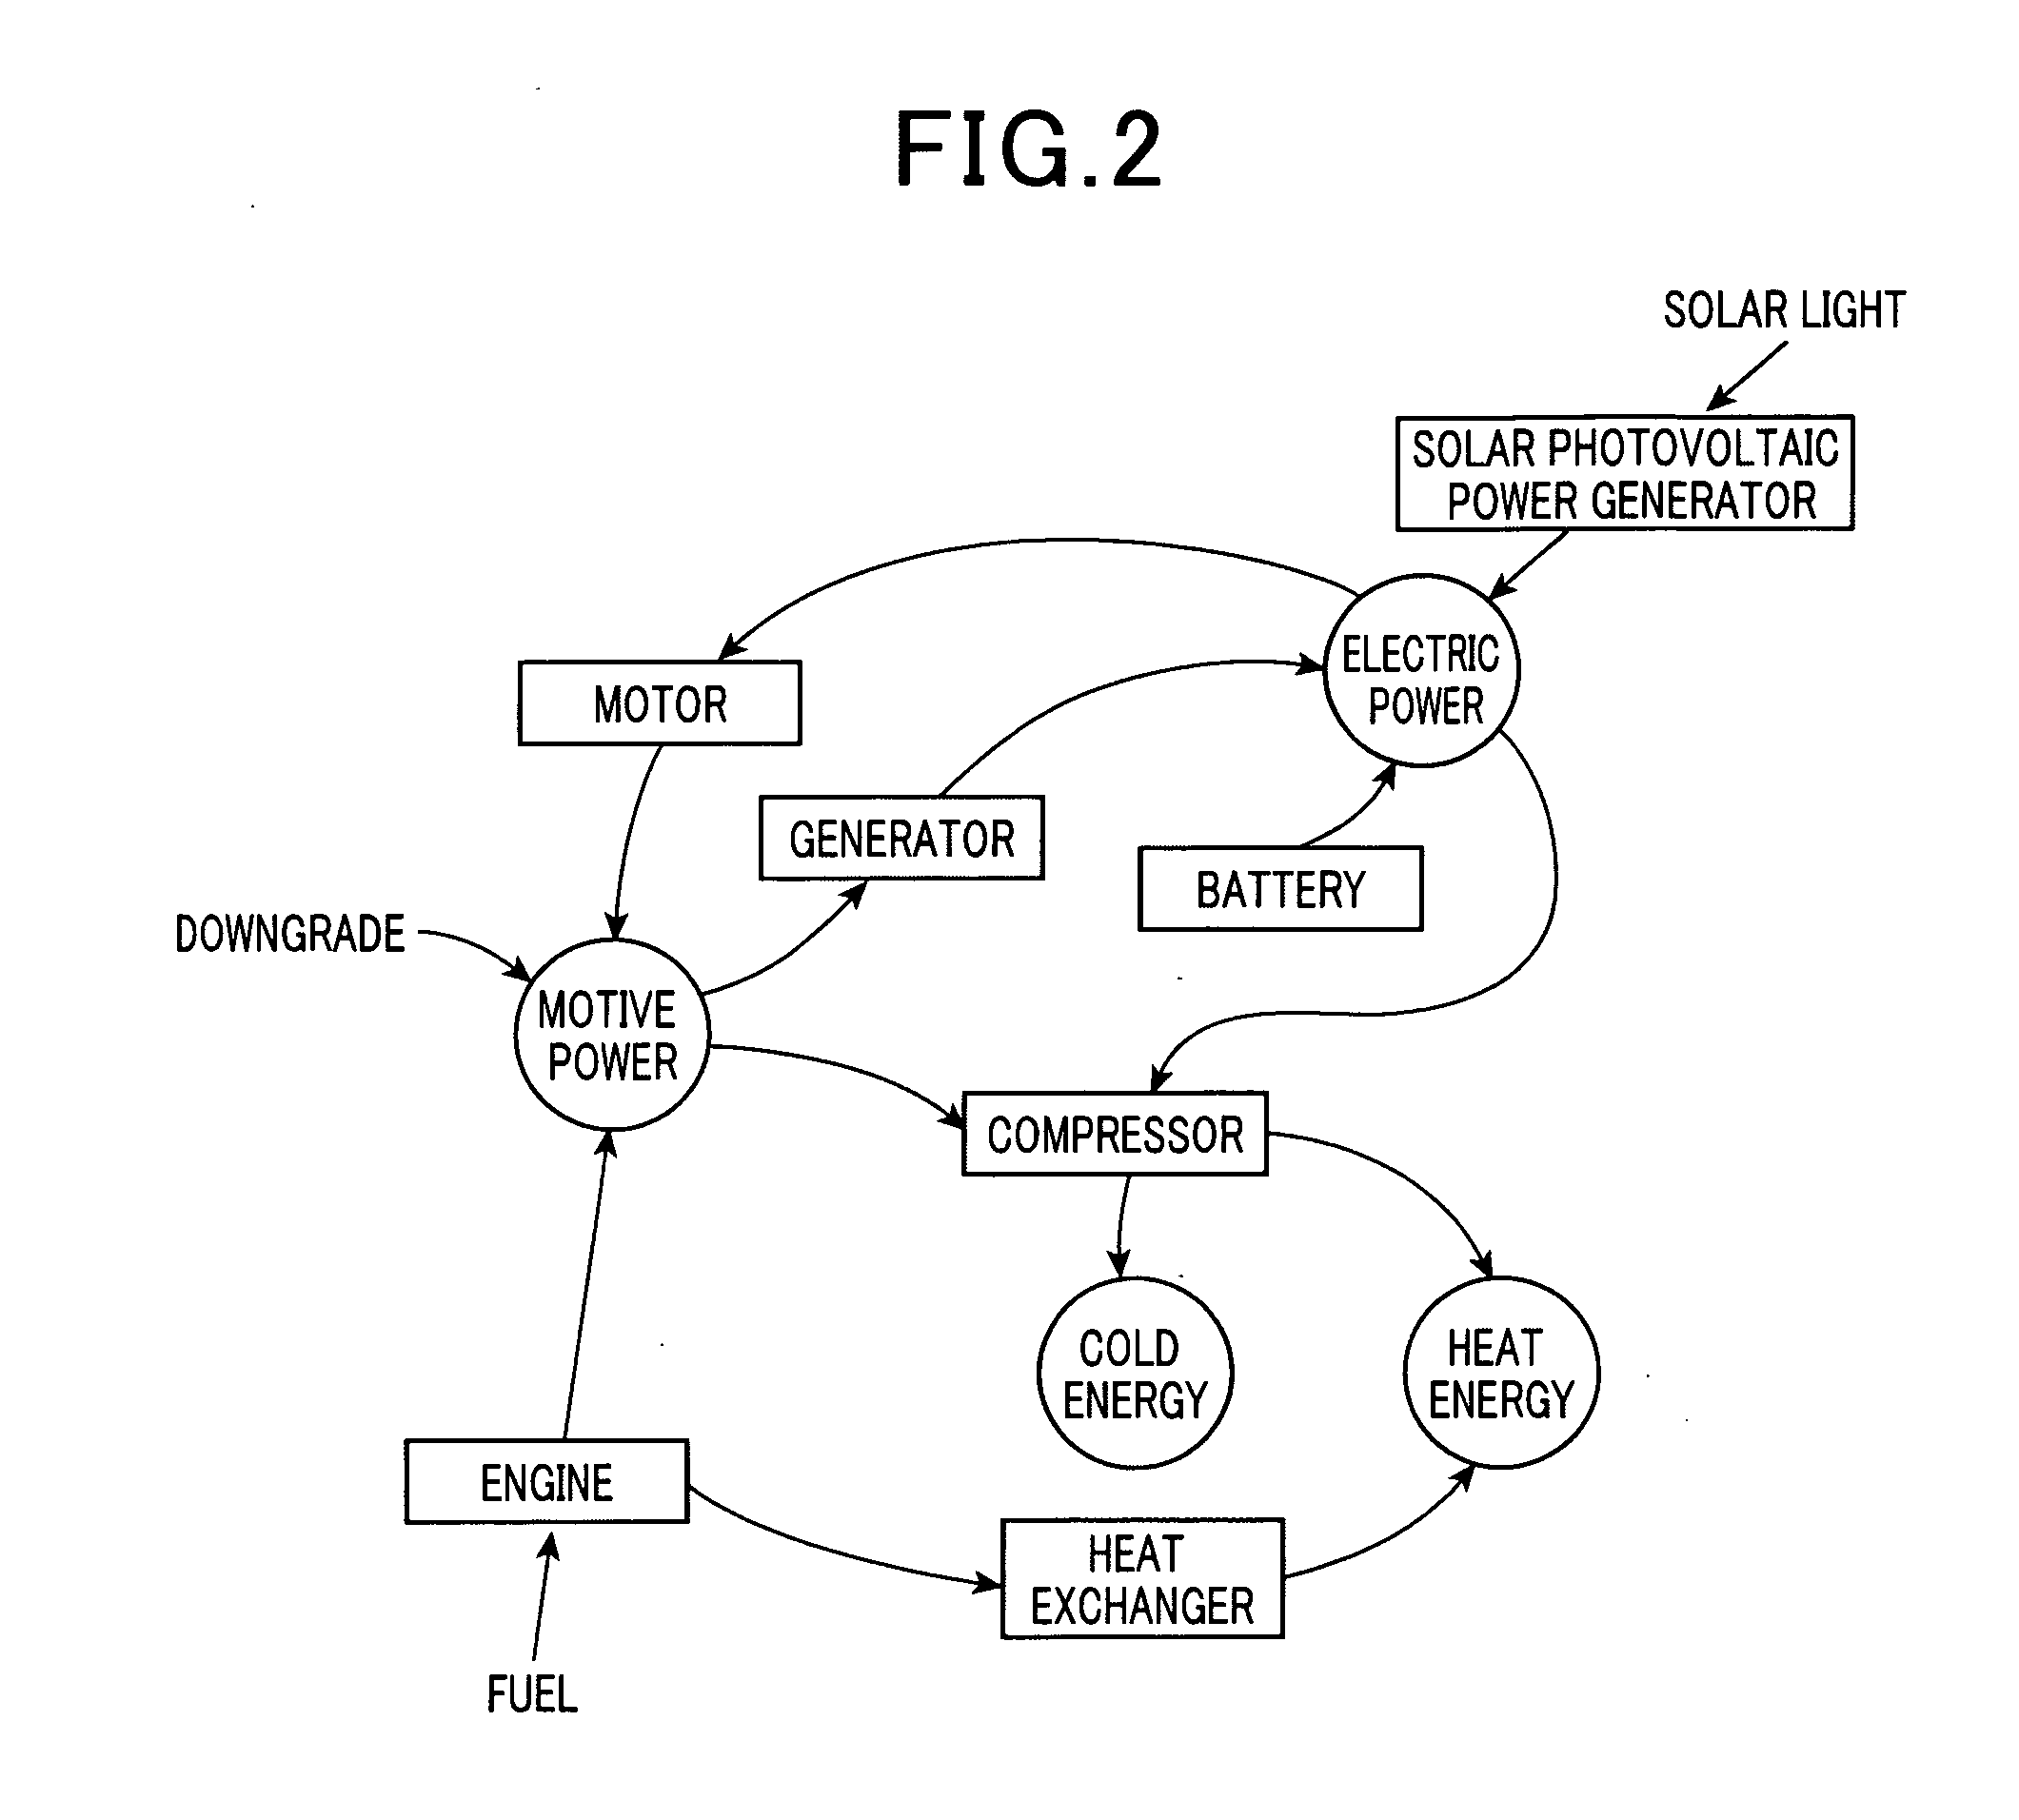 Apparatus for managing energy supplied to functional device units realizing a specific function